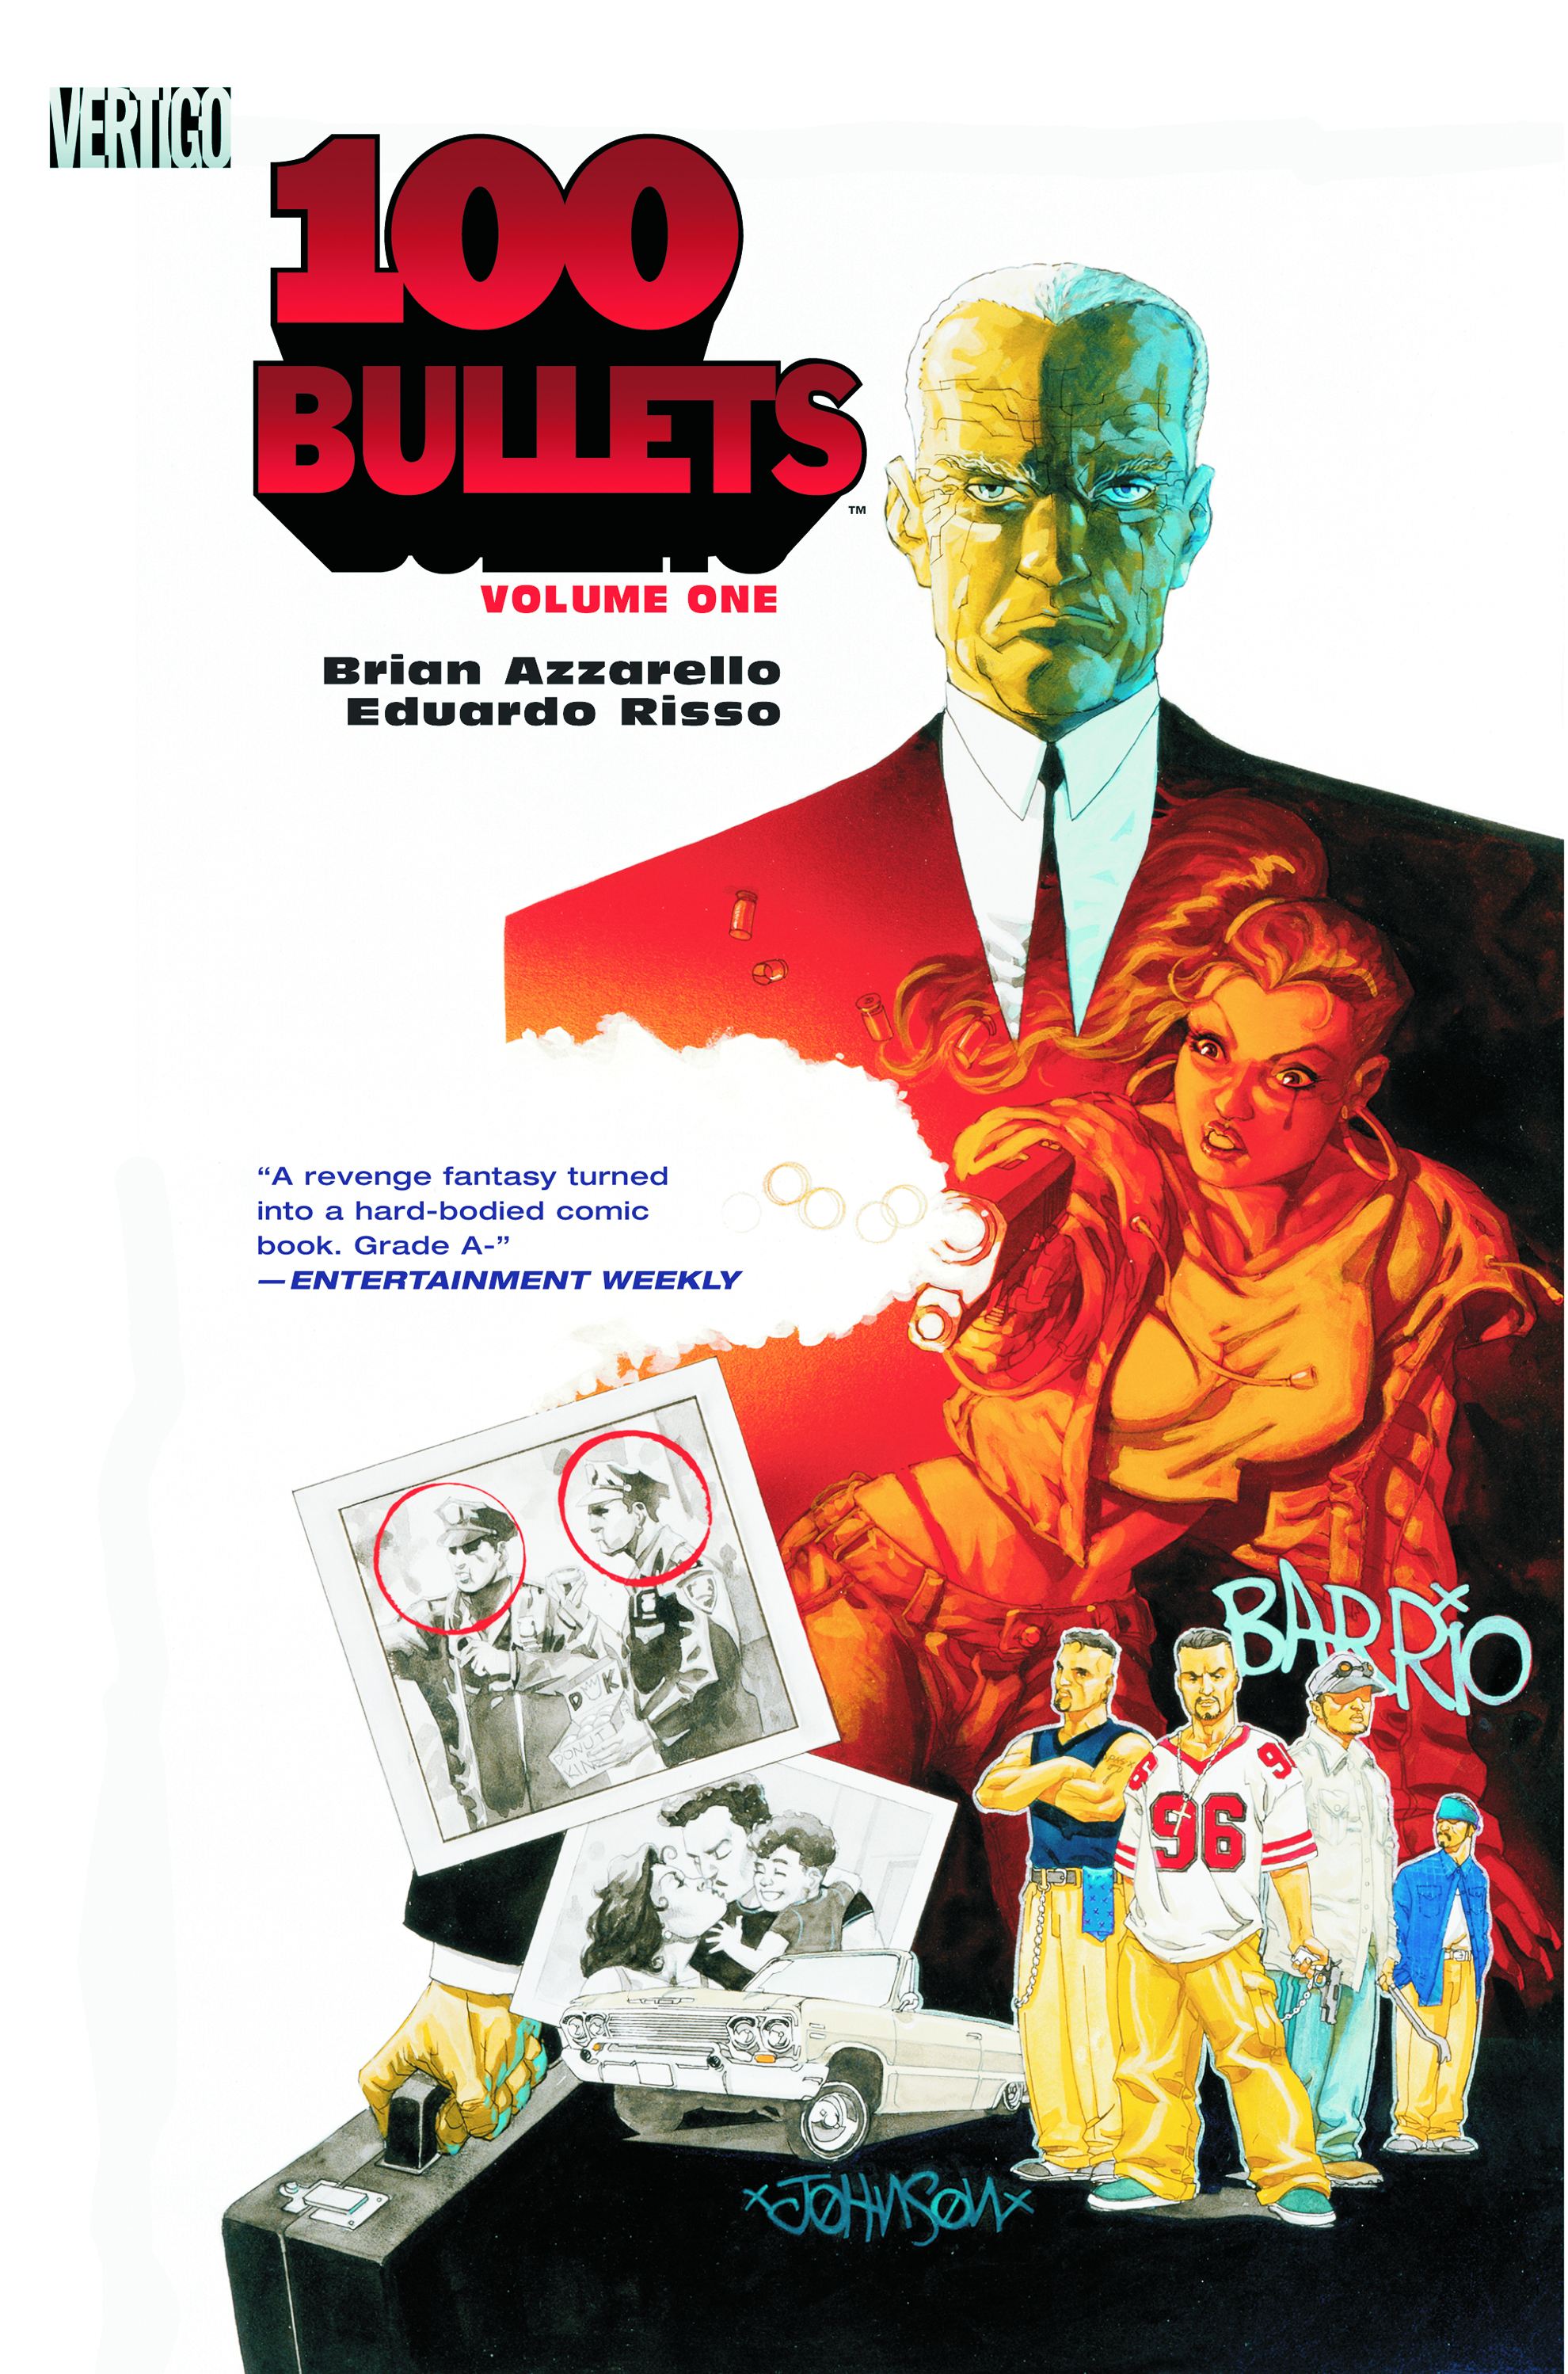 100 bullets book one